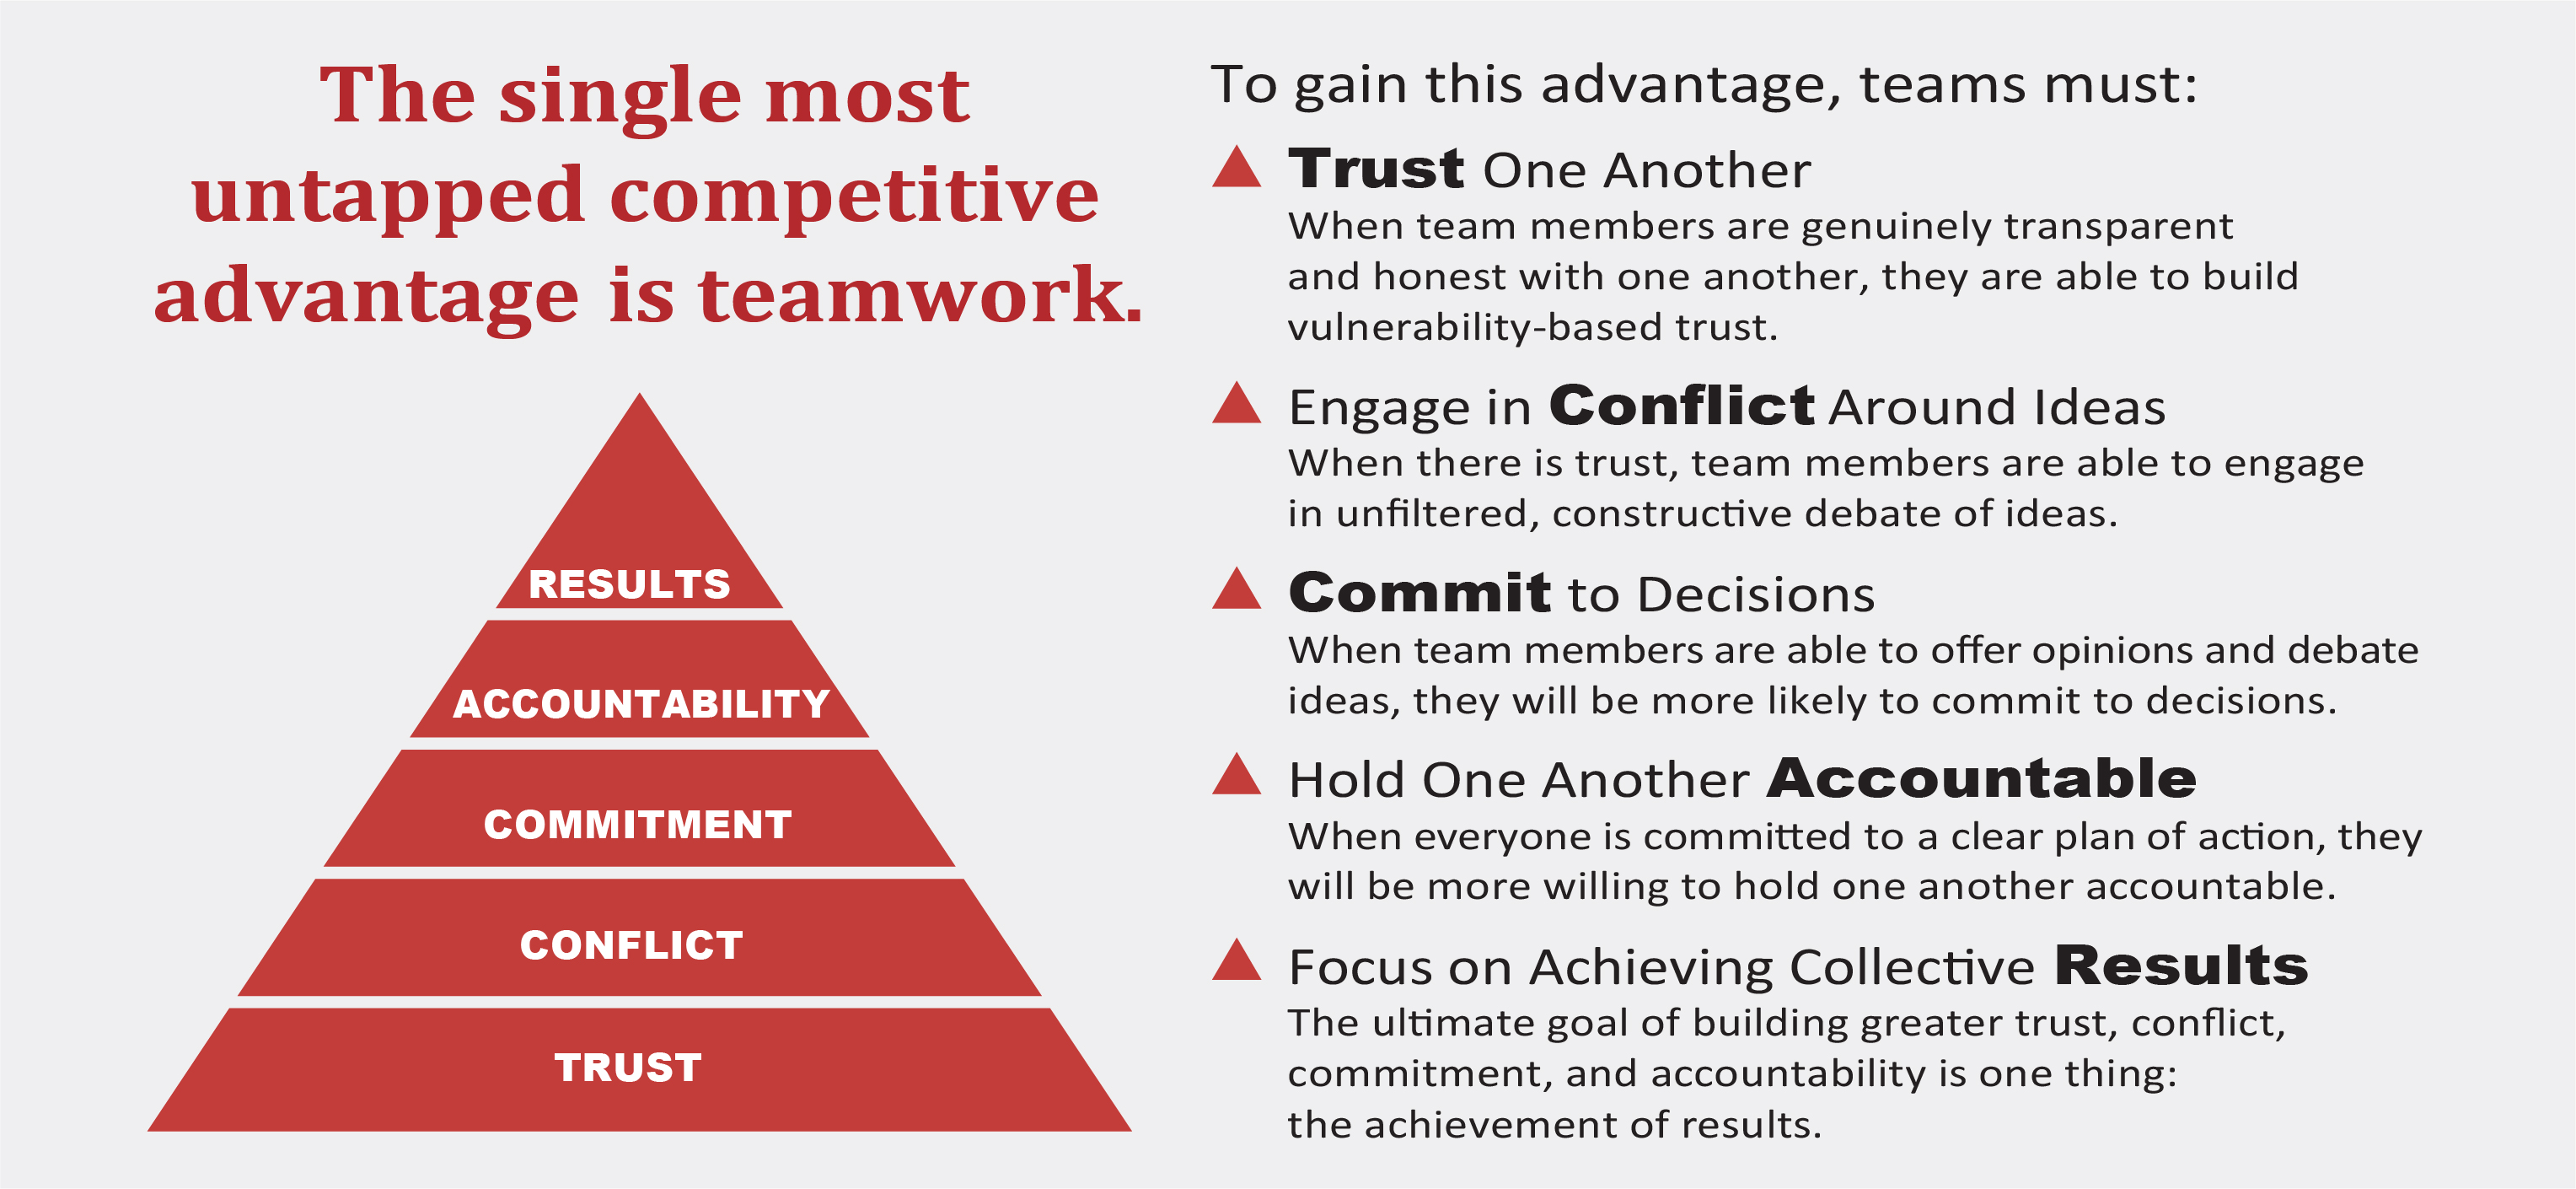 The single most untapped competitive advantage is teamwork.